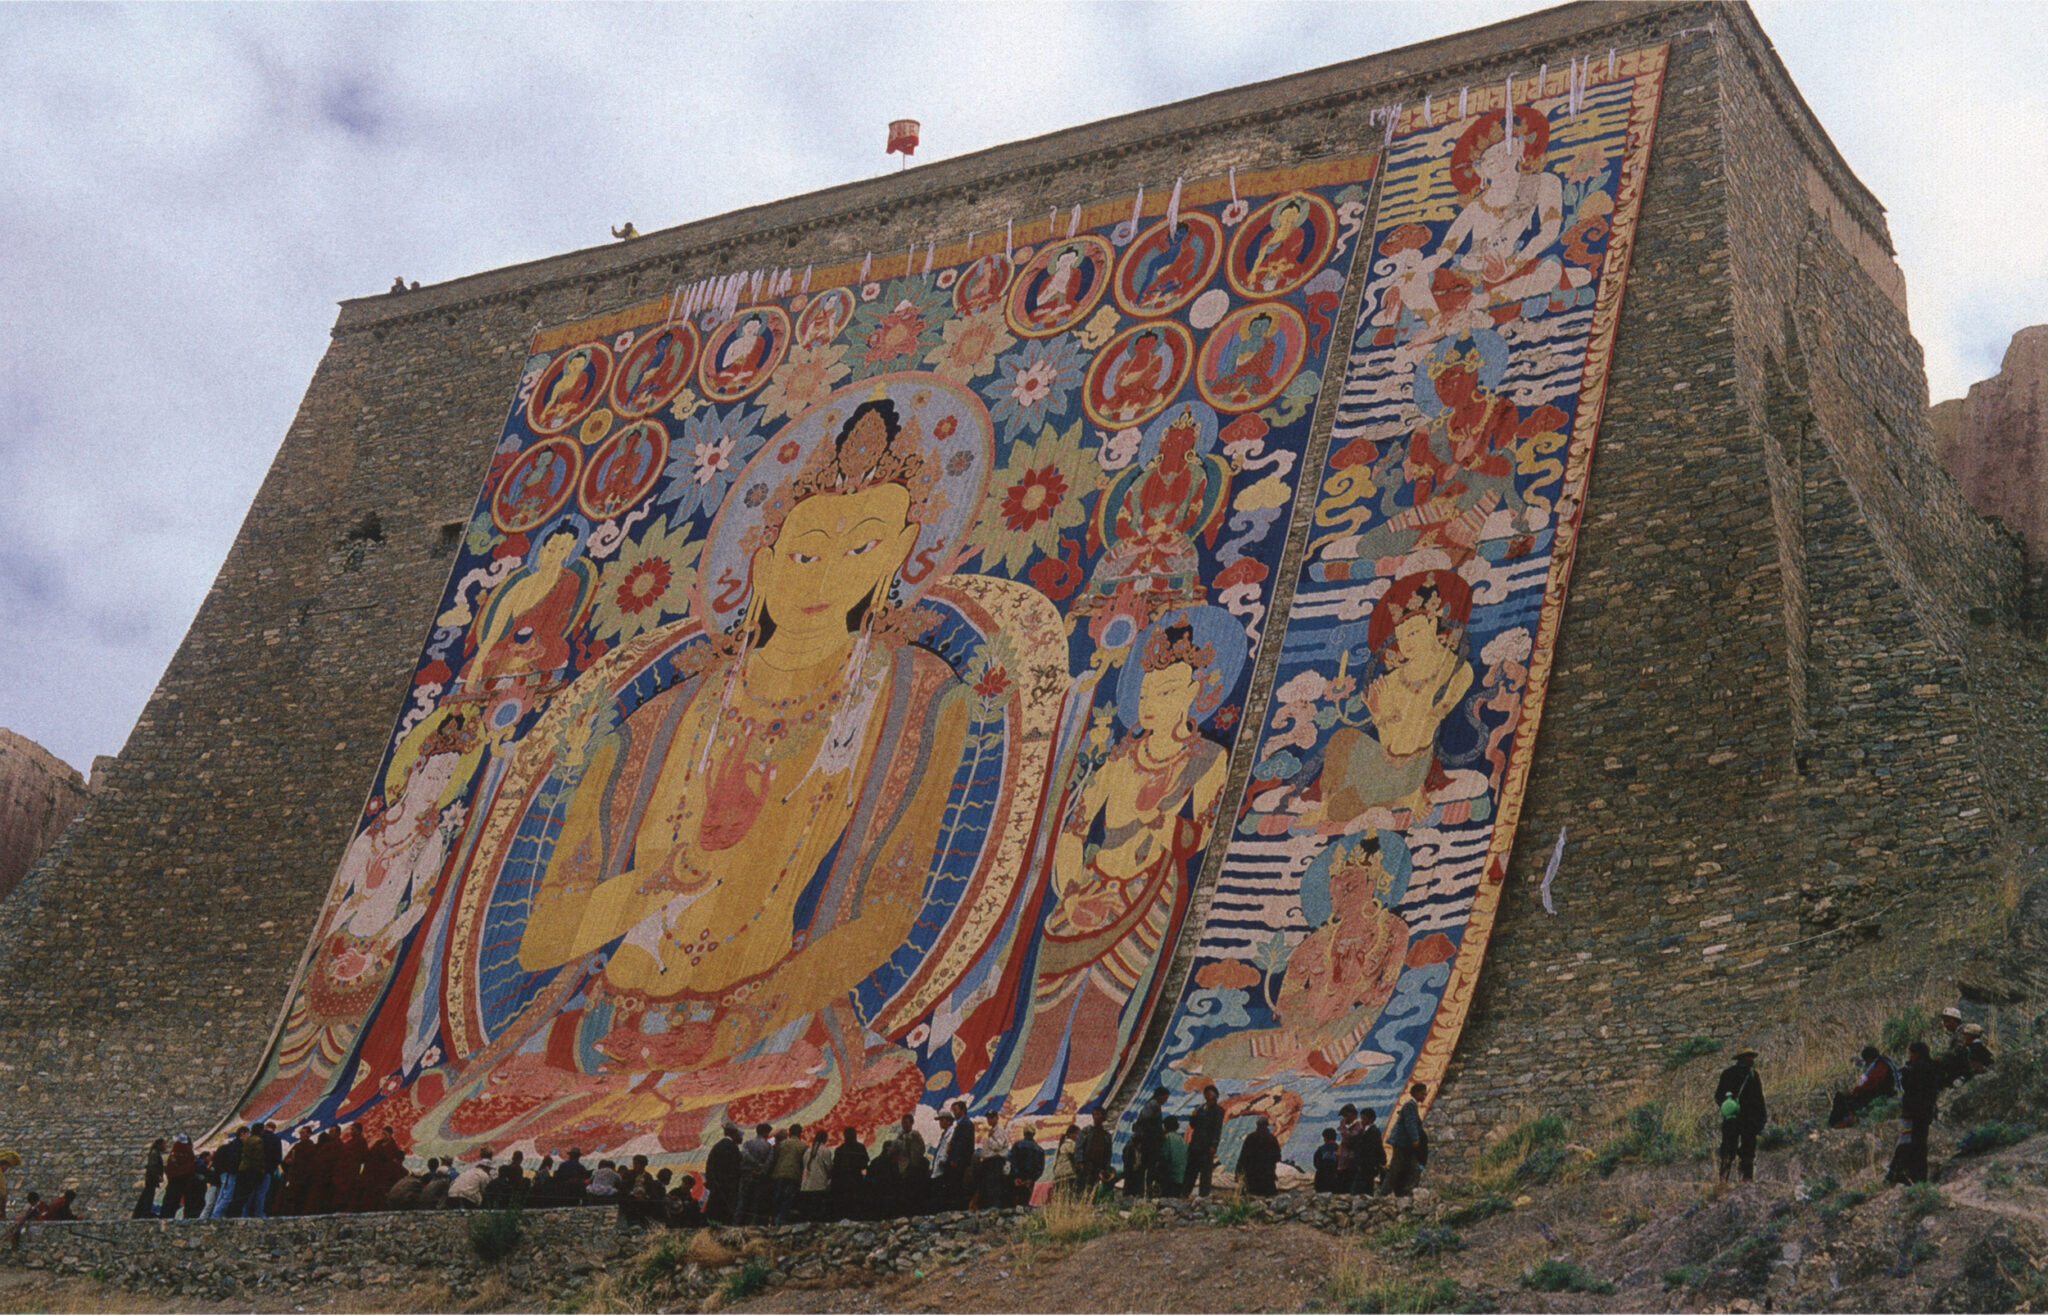 Brightly colored monumental textile depicting various deities hung on sloping stone wall; people standing at base indicate textile’s great size